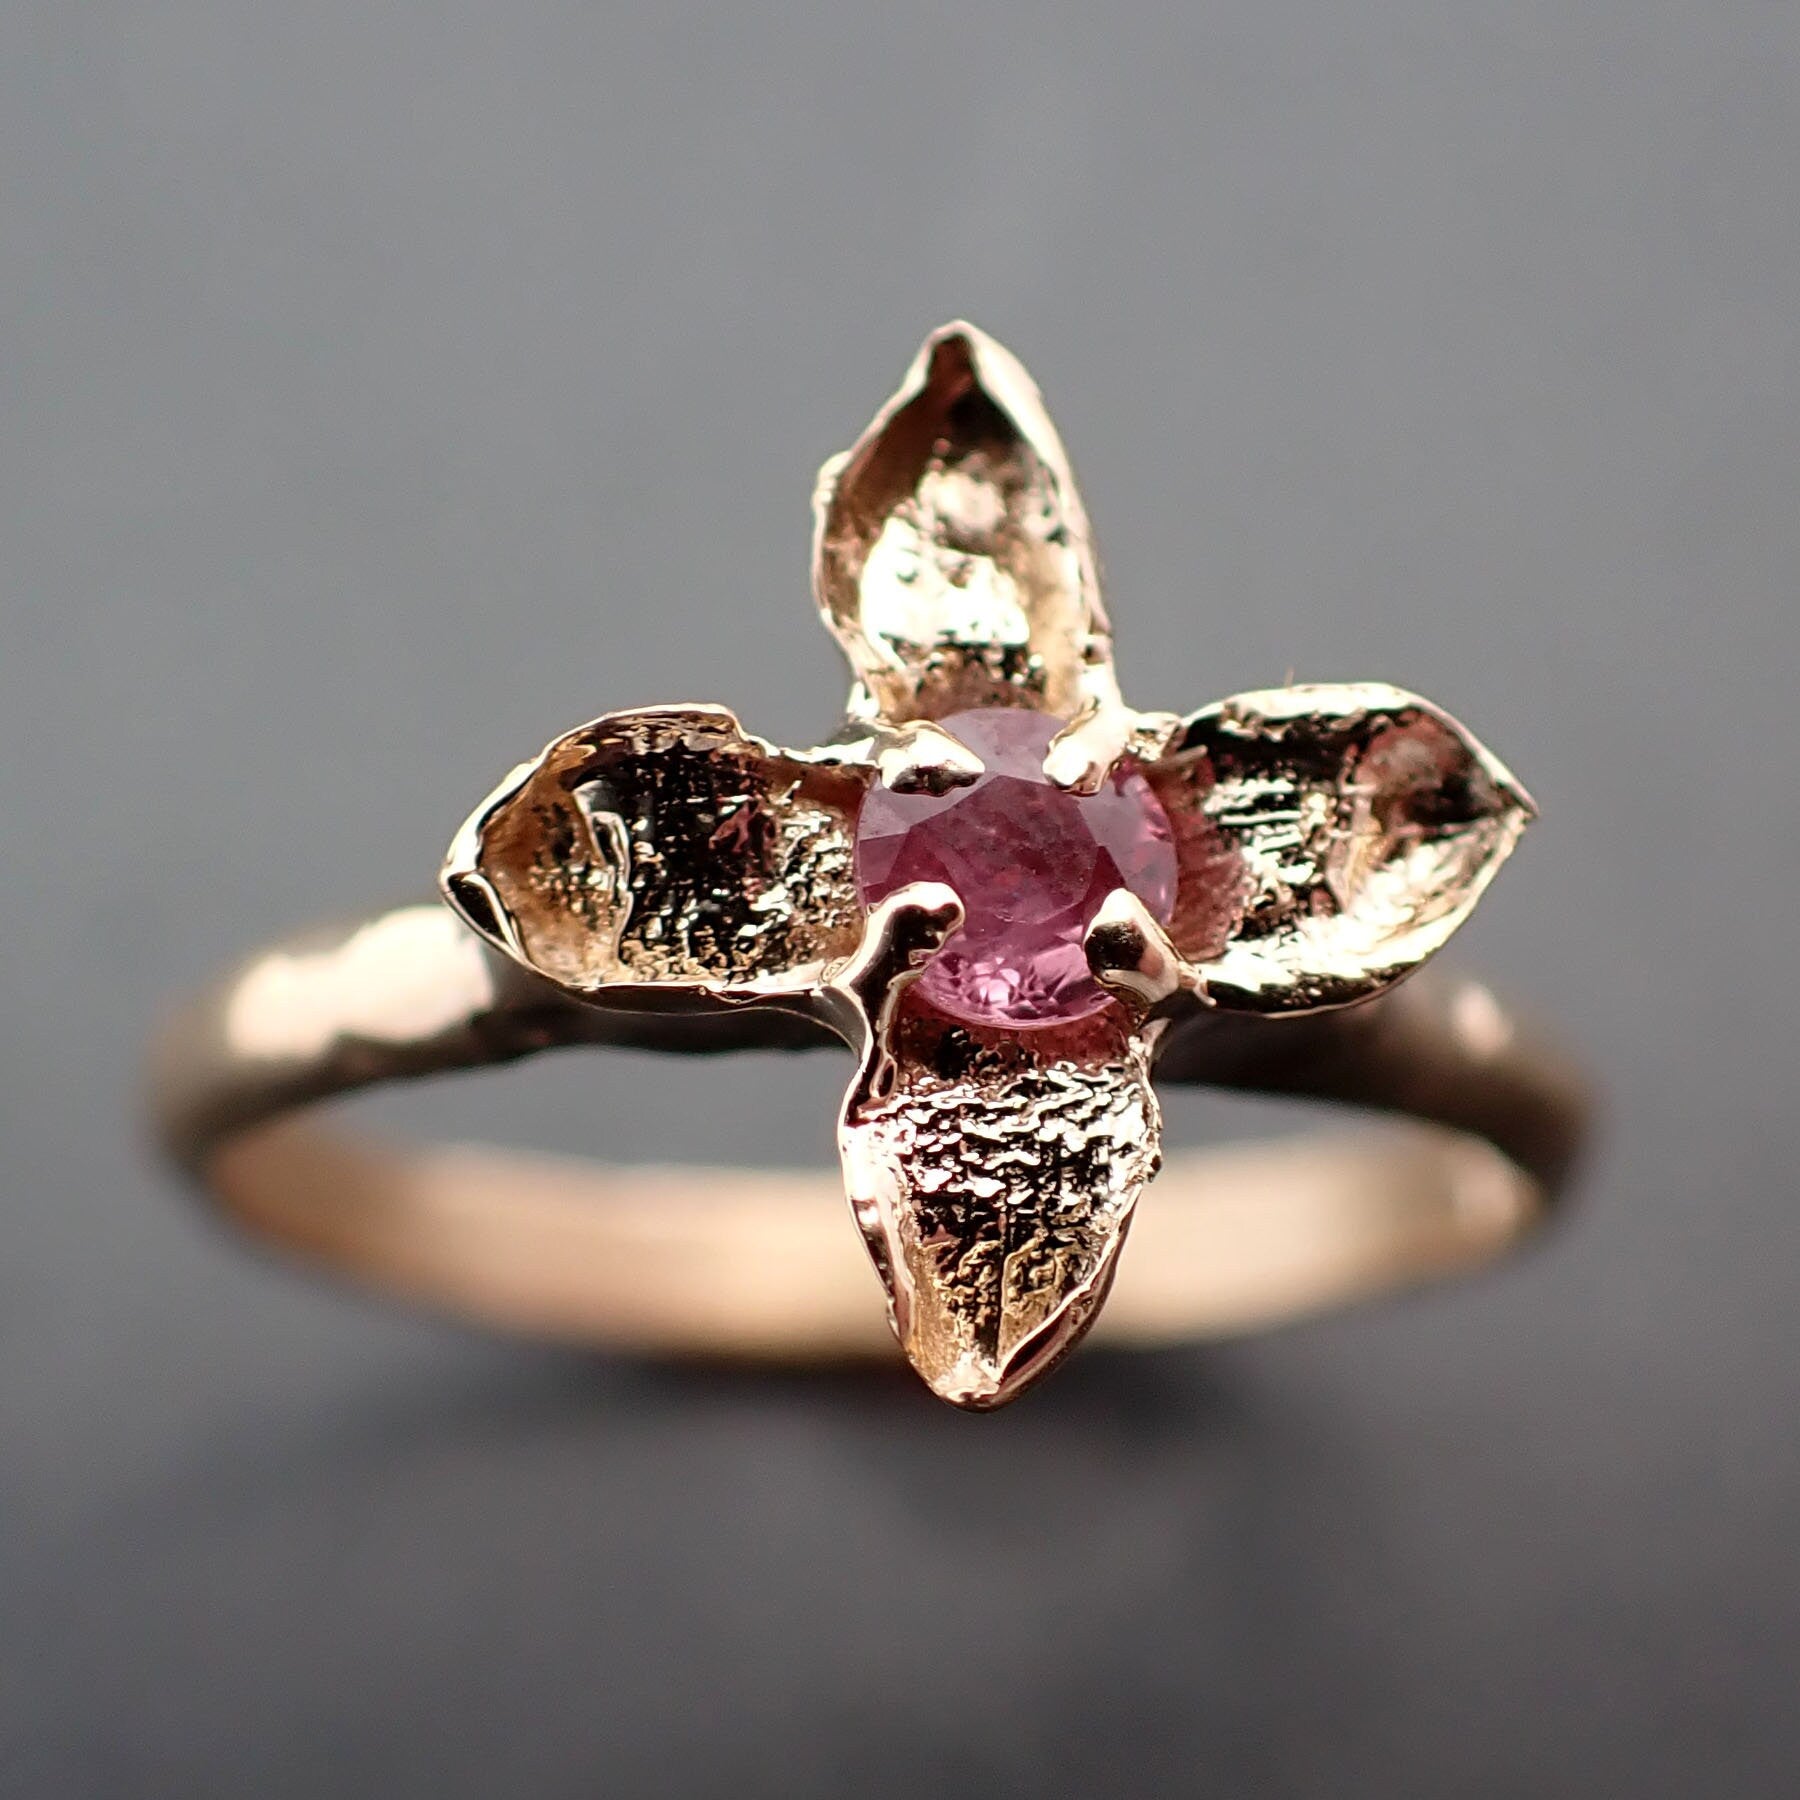 Real Lilac Flower casting with faceted Rubies 14k Yellow gold Solitaire Enchanted Garden Floral Ring byAngeline 3377